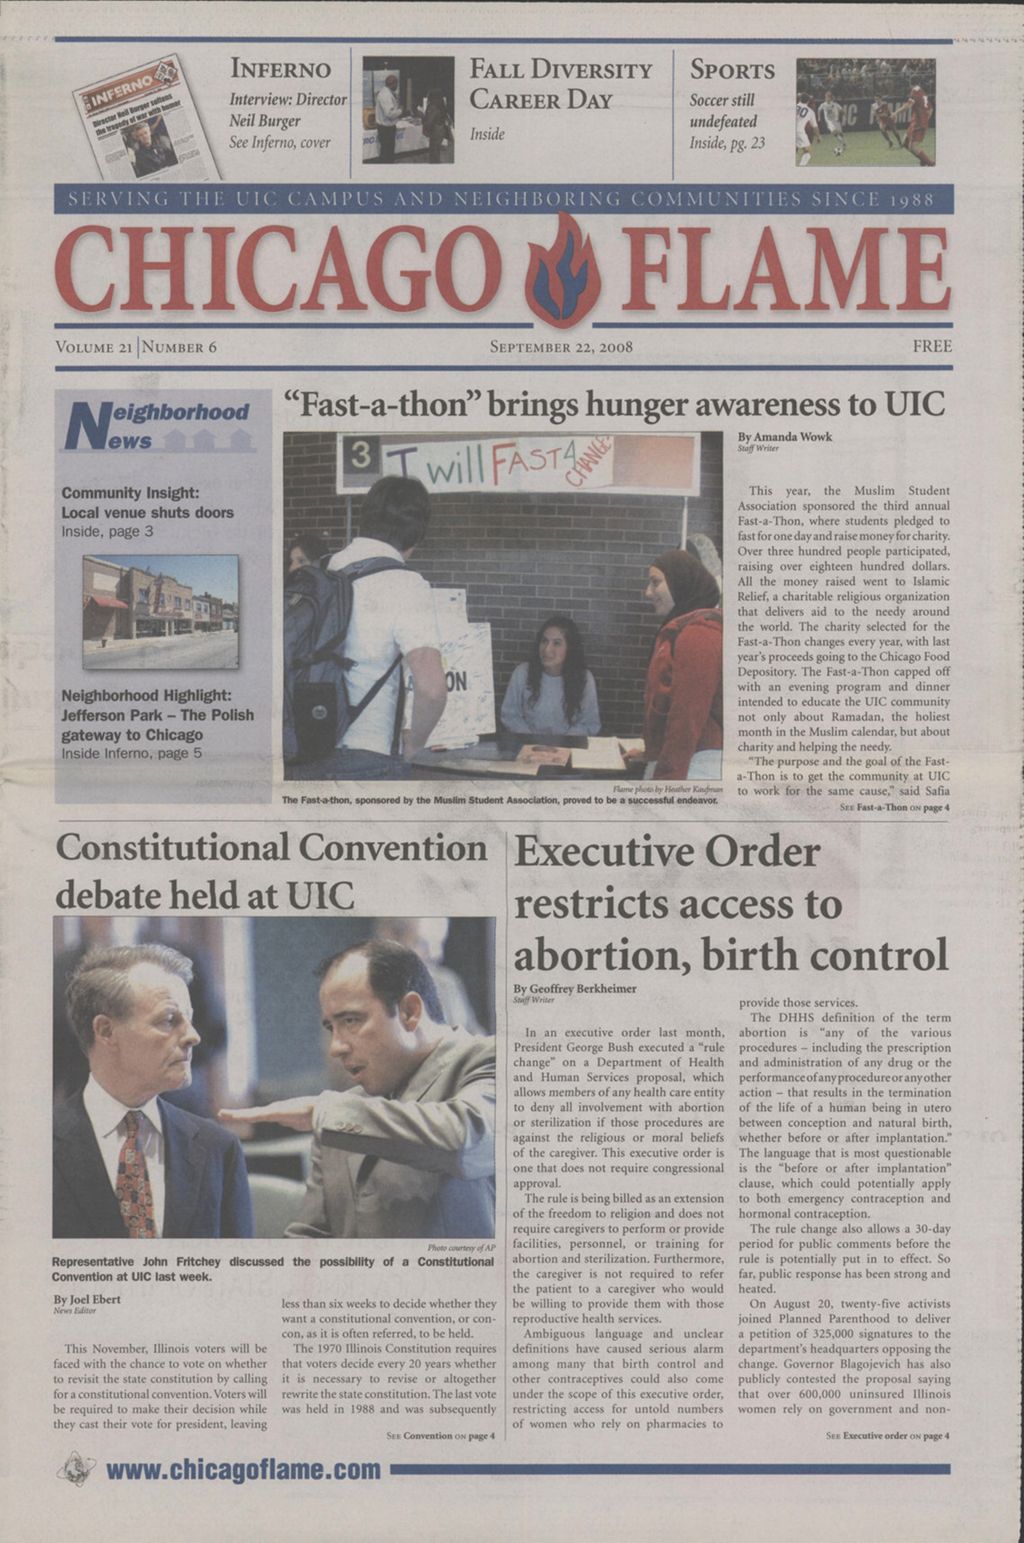 Miniature of Chicago Flame (September 22, 2008)